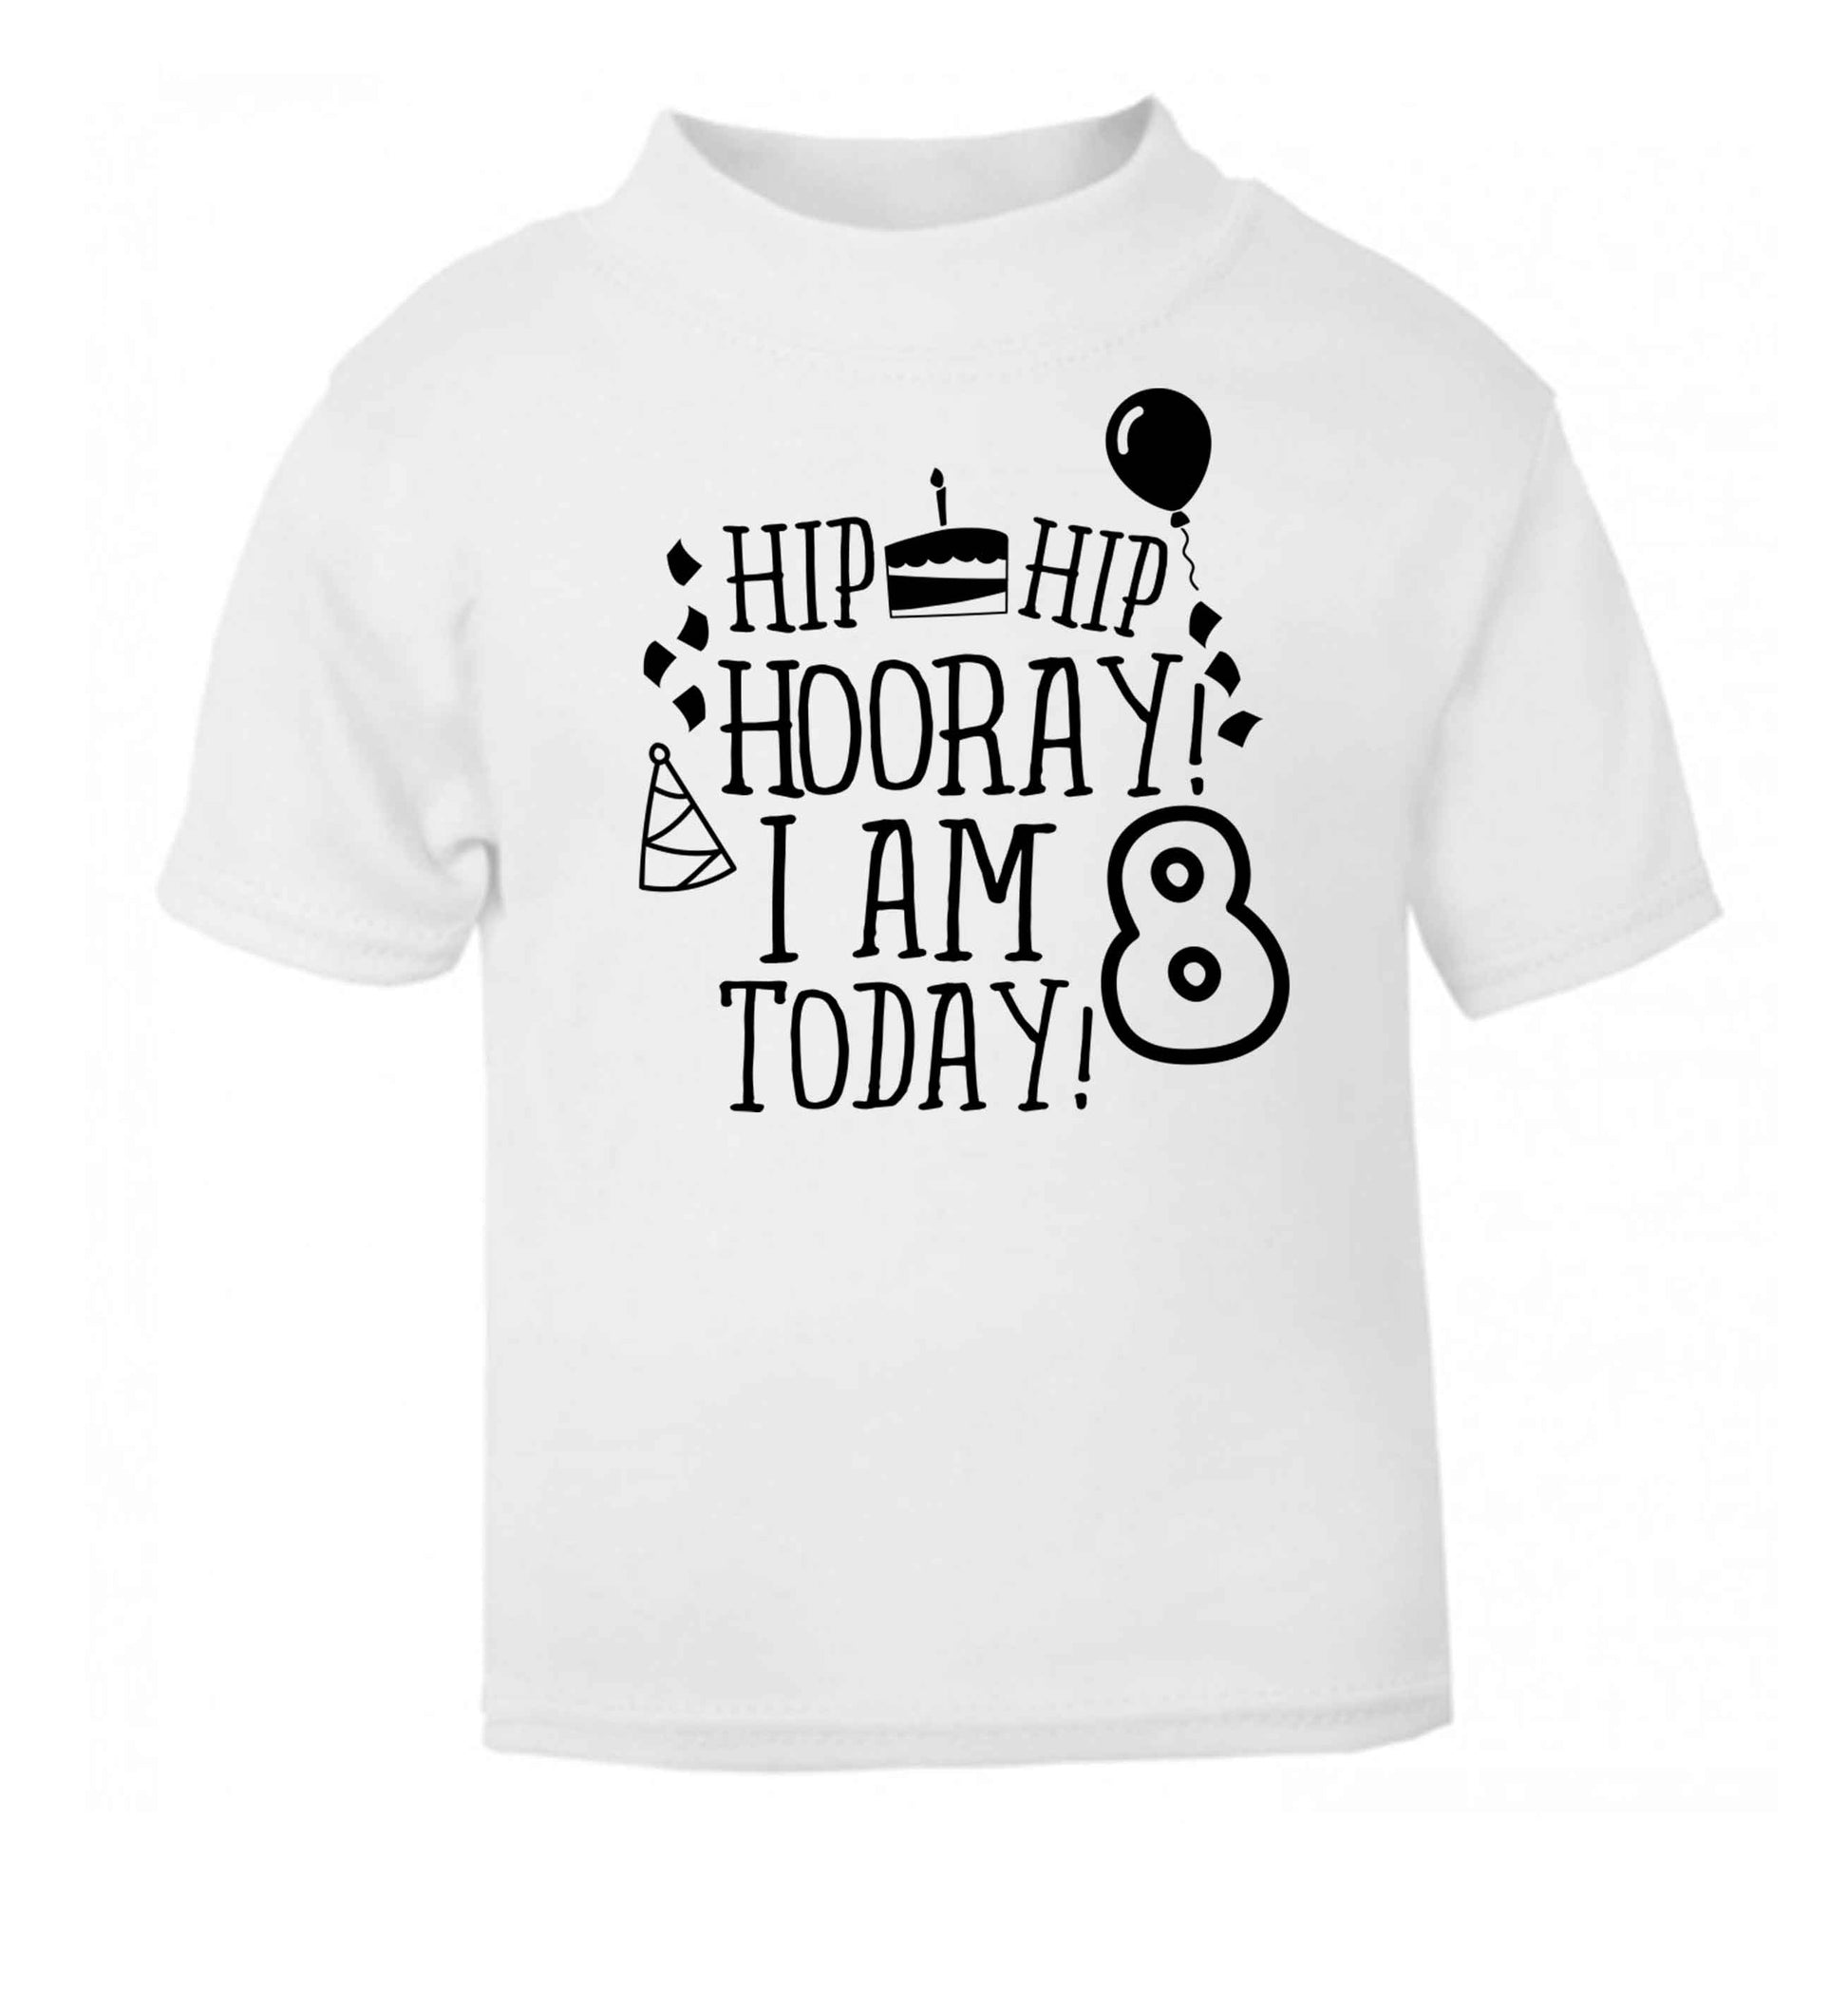 Hip hip hooray I am 8 today! white baby toddler Tshirt 2 Years